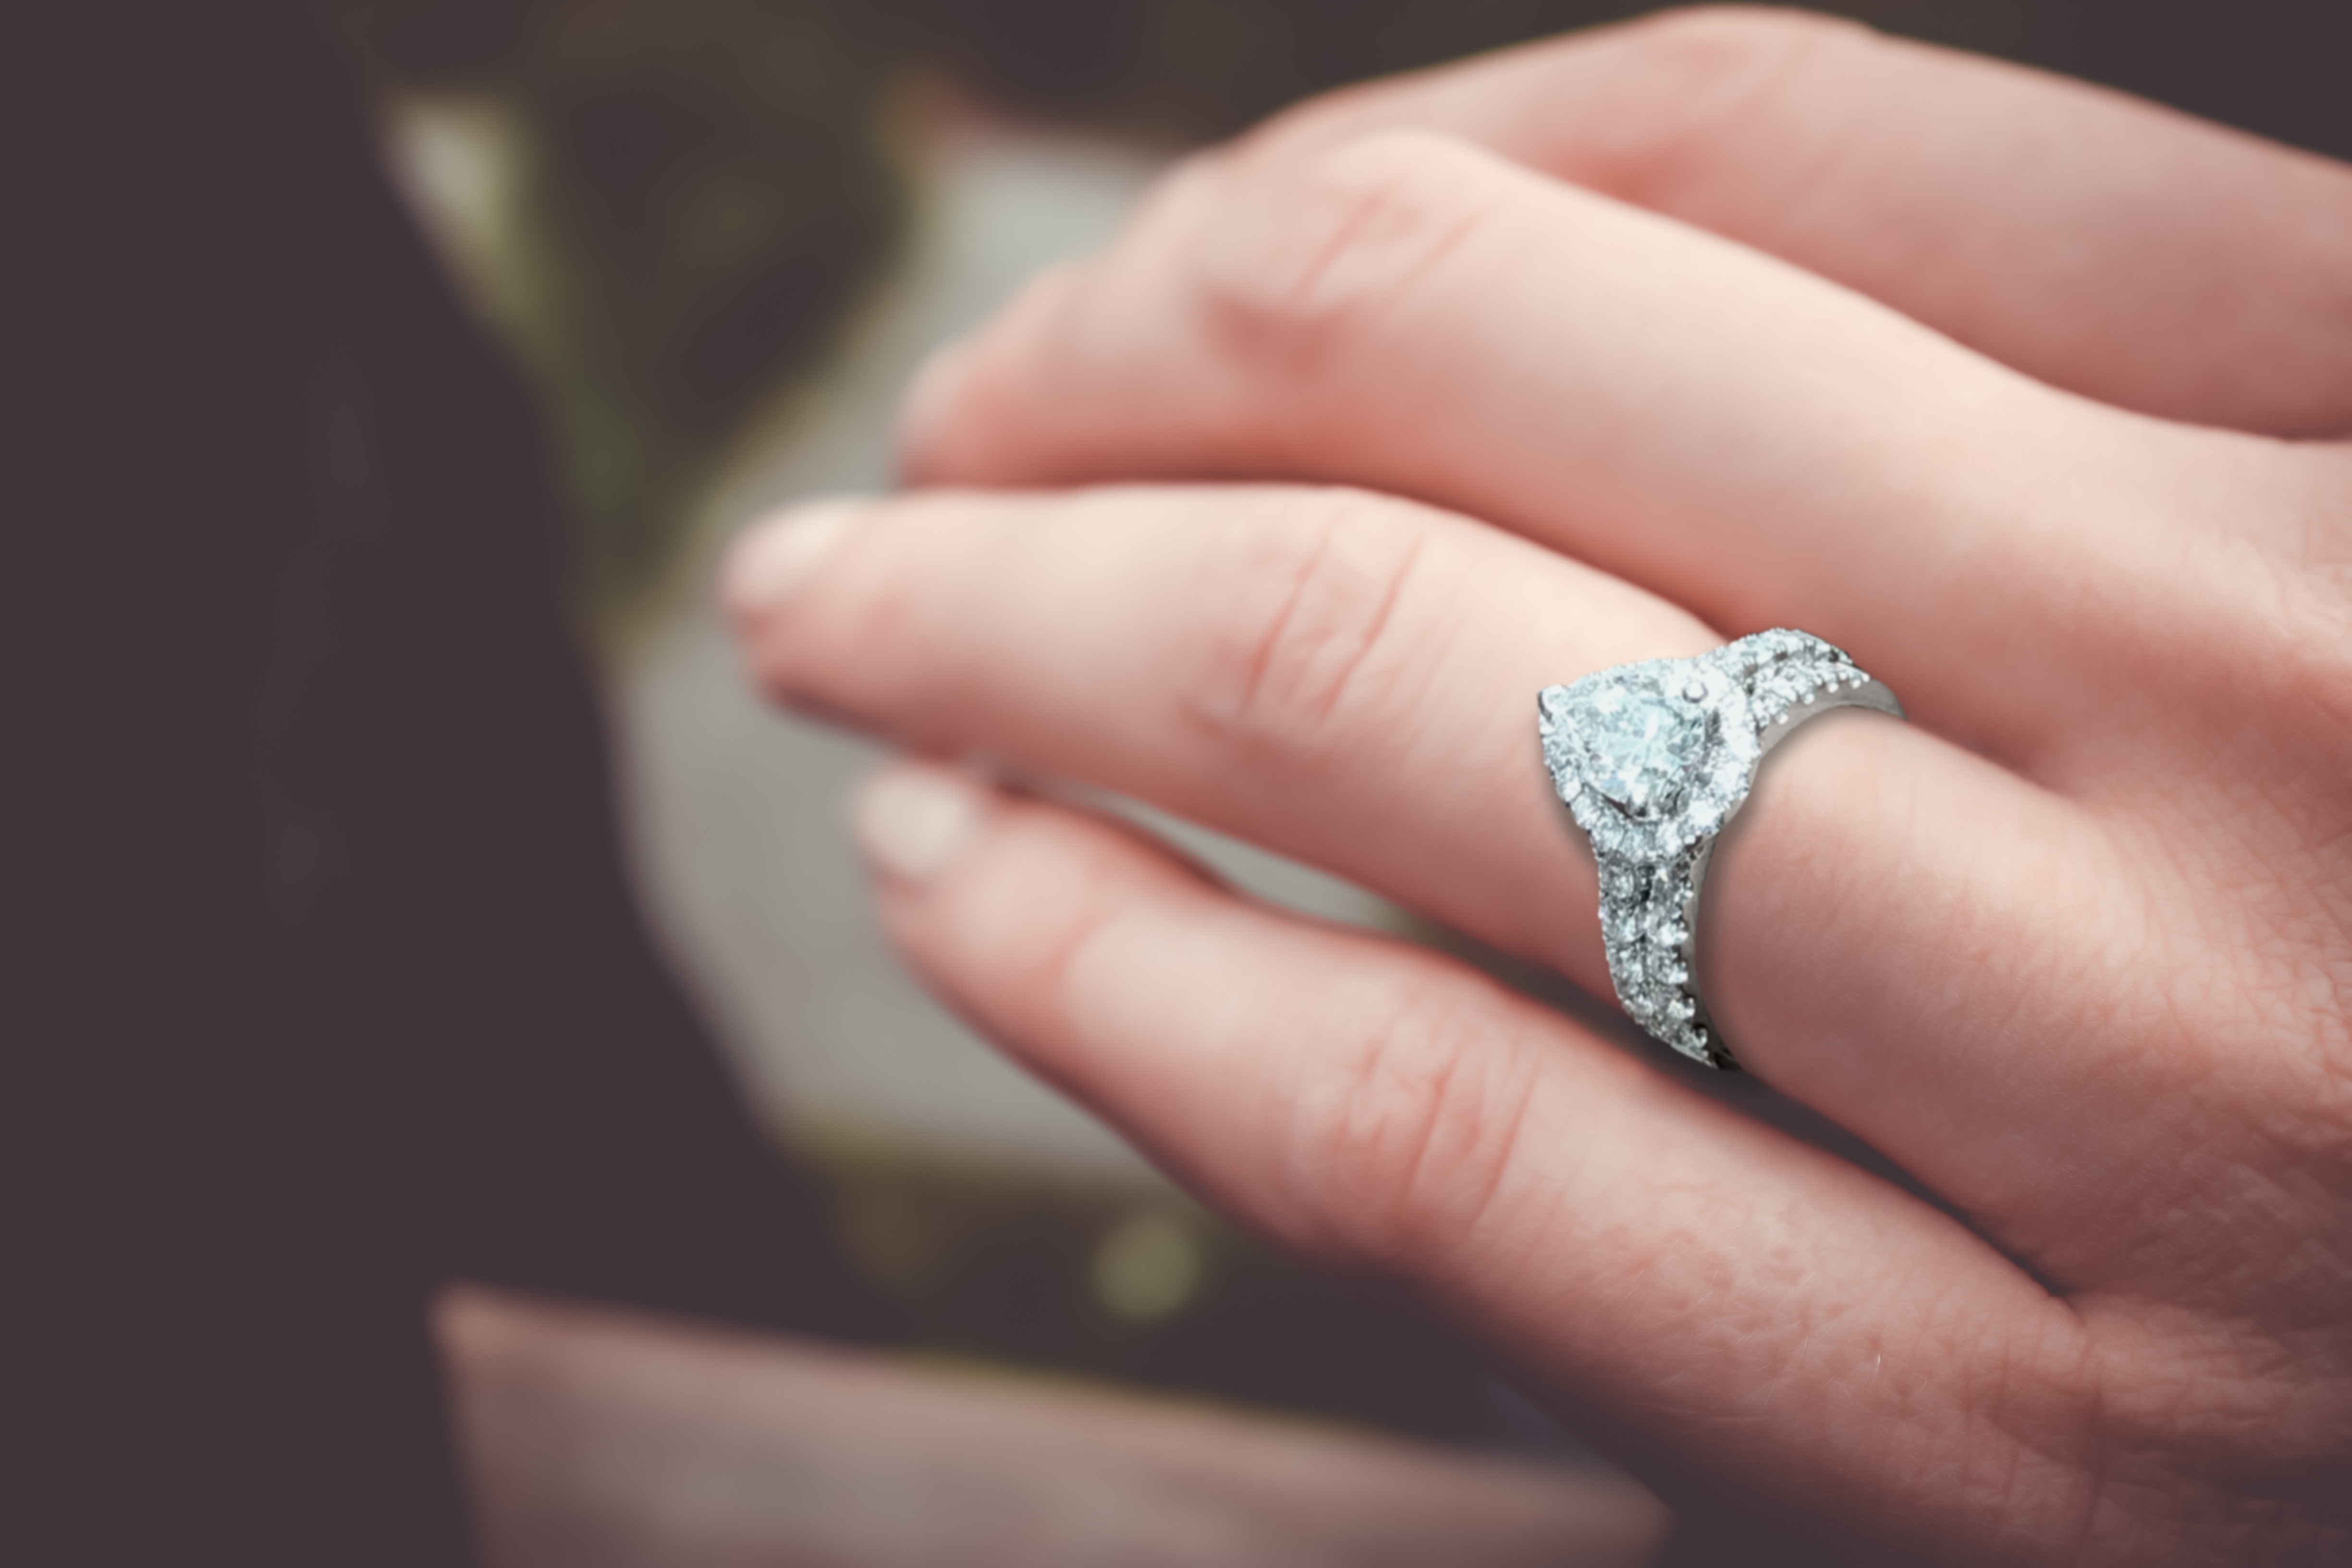 From cleaning to getting insurance - here are the answers to the engagement  ring questions you've always had | The Sun